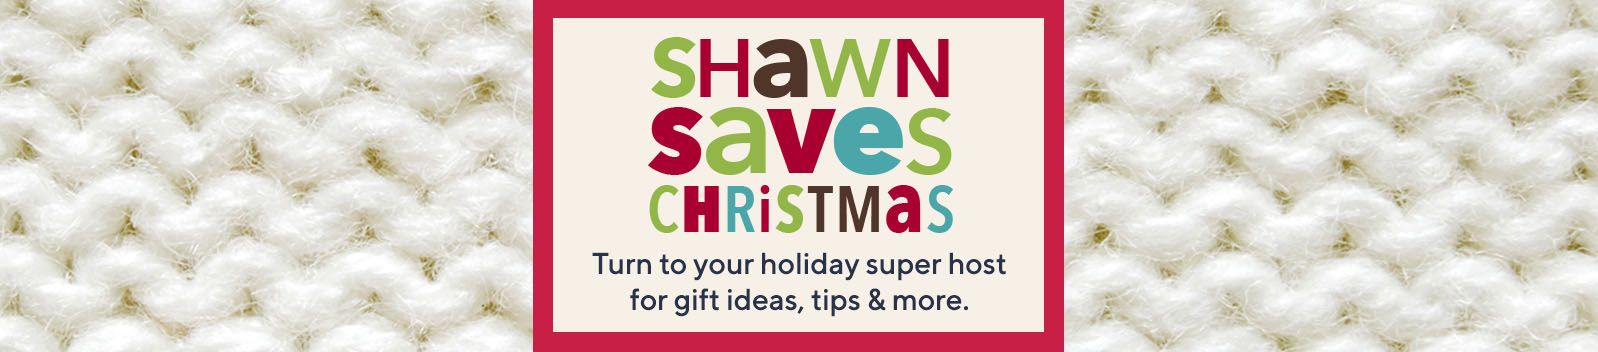 Shawn Saves Christmas  Turn to your holiday super host for gift ideas, tips & more. 